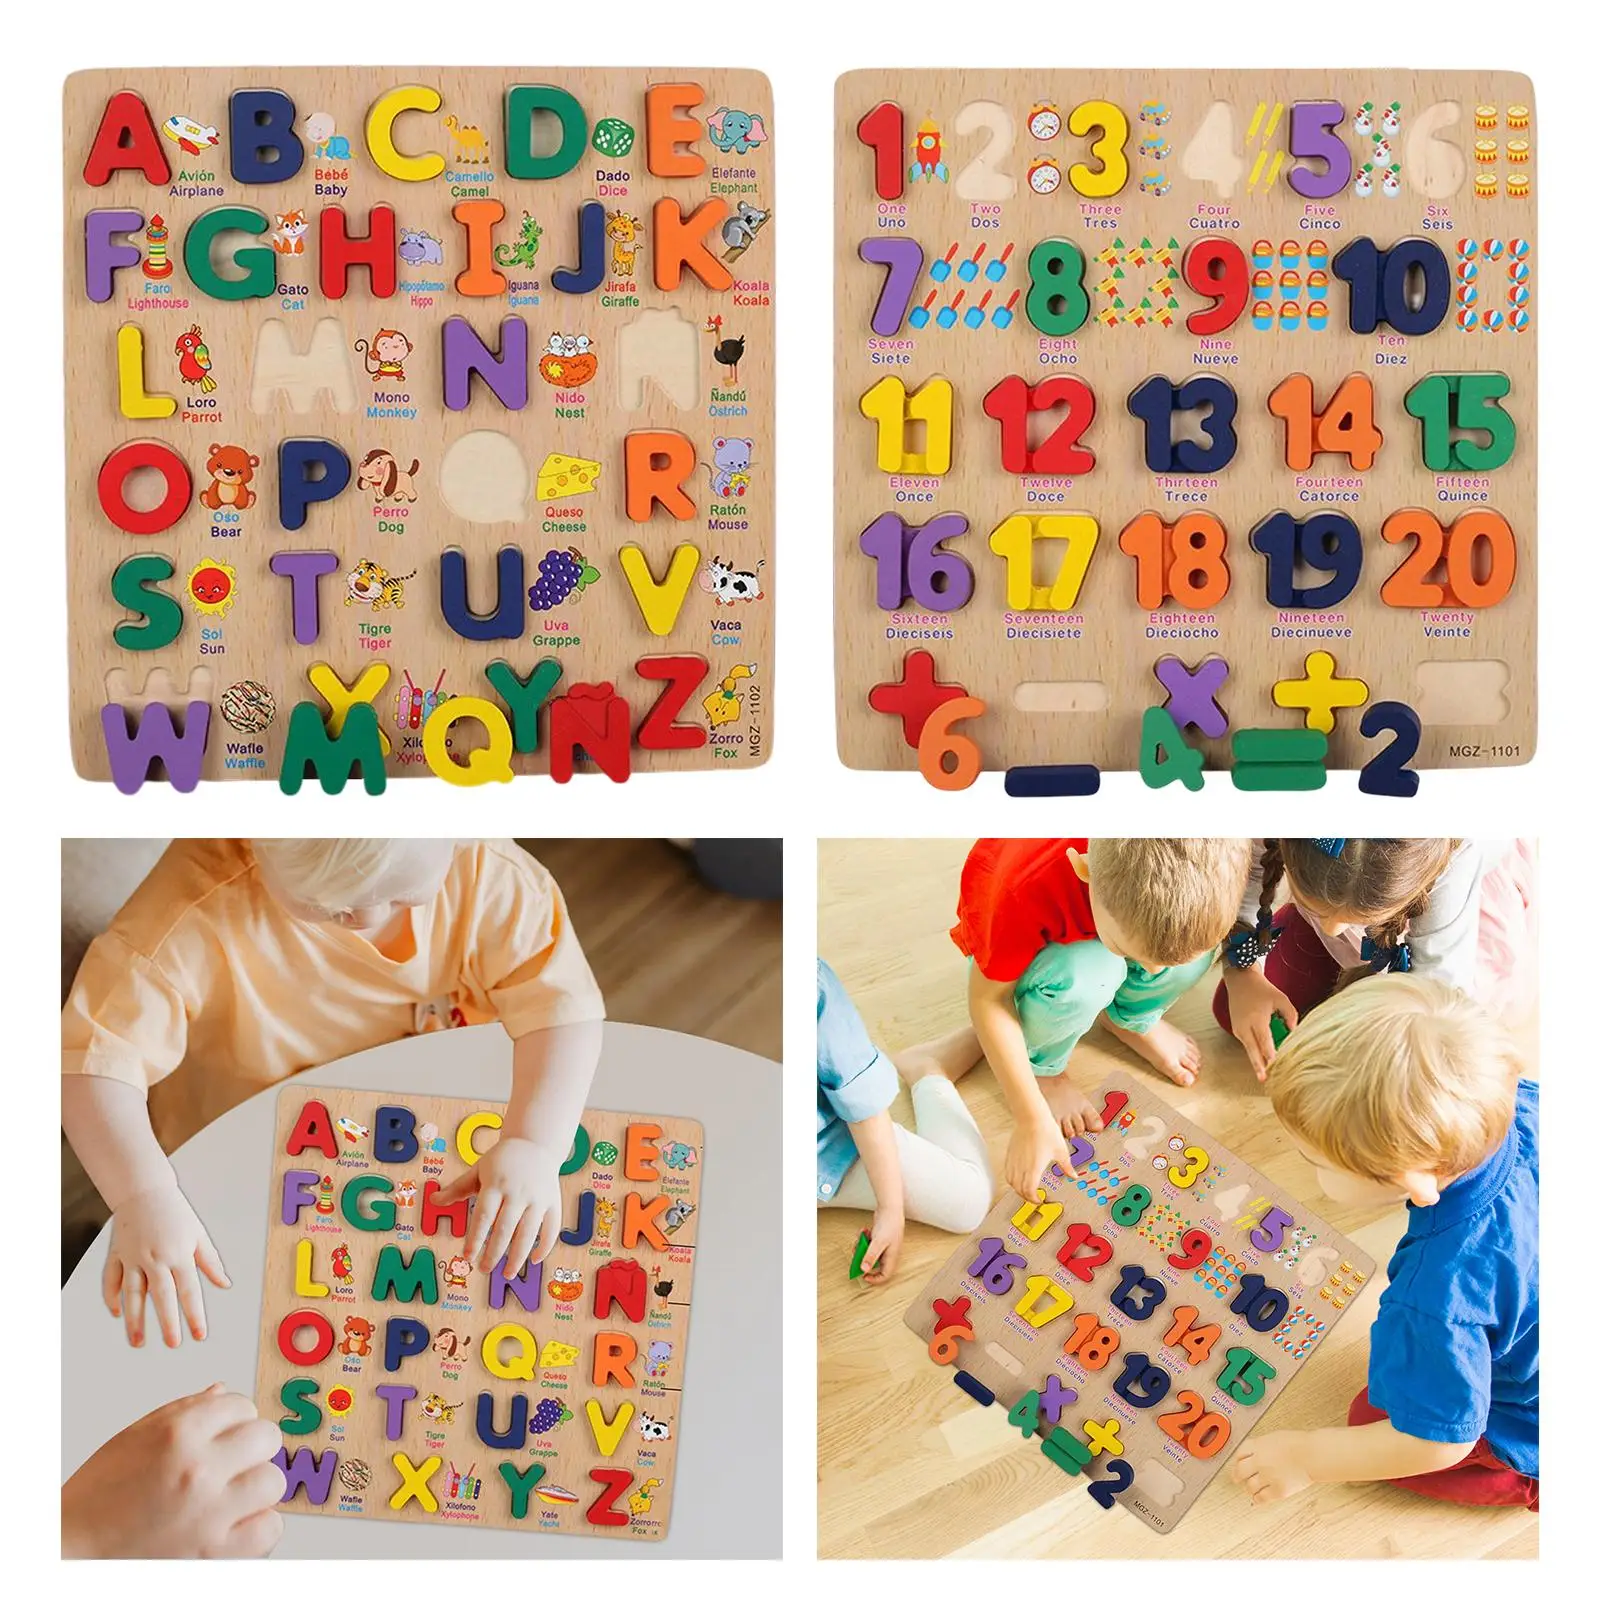 Spanish Blocks Jigsaw Wooden Pegged Puzzles Preschool Educational Toy Smooth Colors Holiday Gift